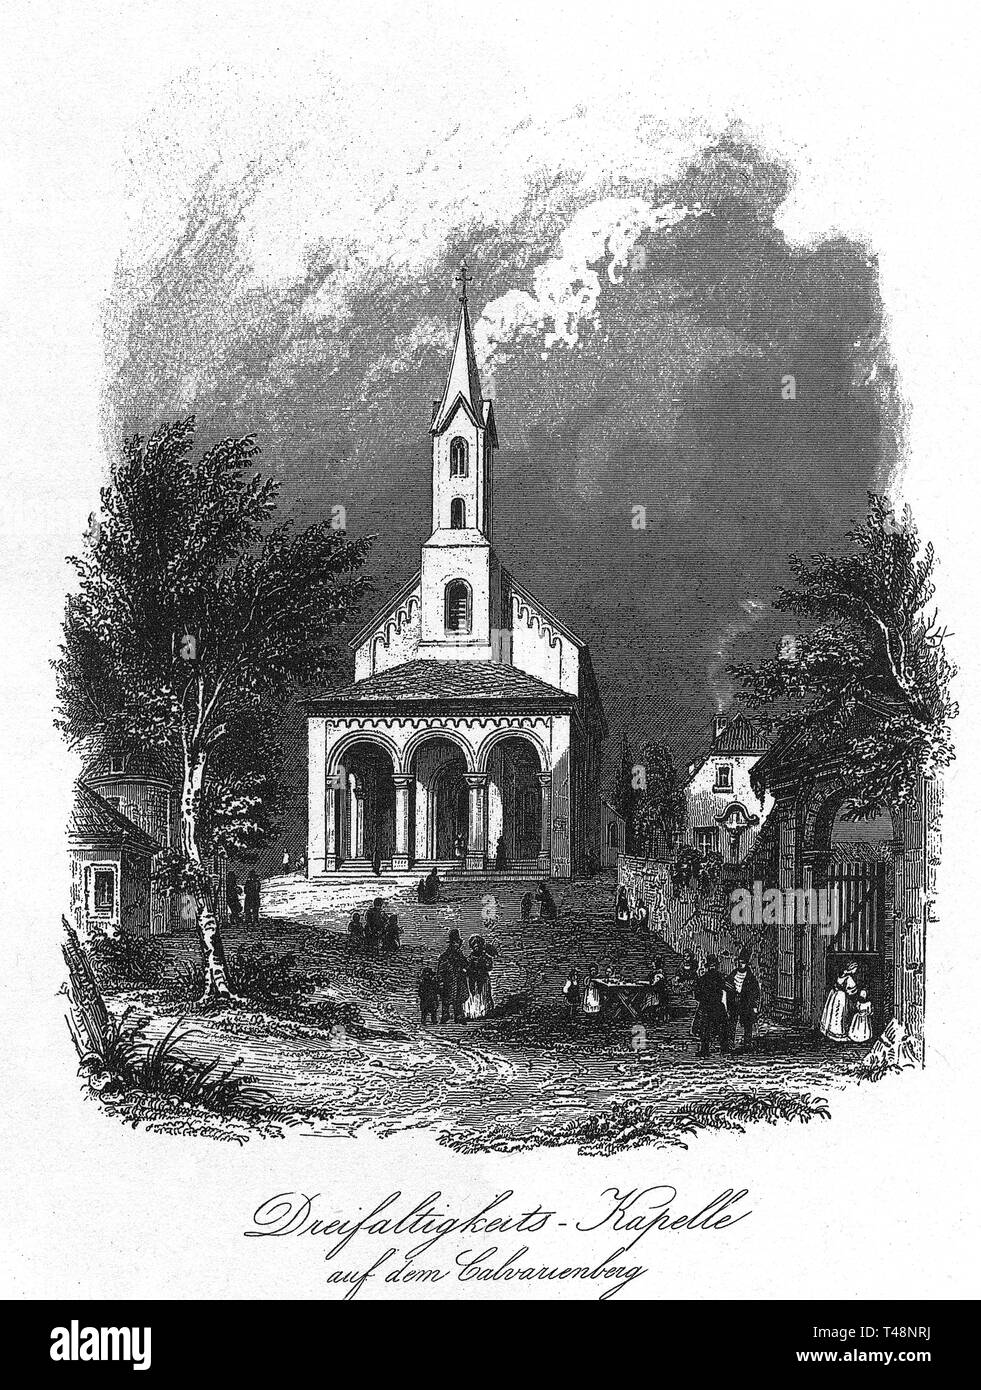 Chapel of the Holy Trinity on Calvary Hill, Regensburg, drawing by Ed. Gernhardt, steel engraving by J. Poppel, 1840-1854, Kingdom of Bavaria, Germany Stock Photo